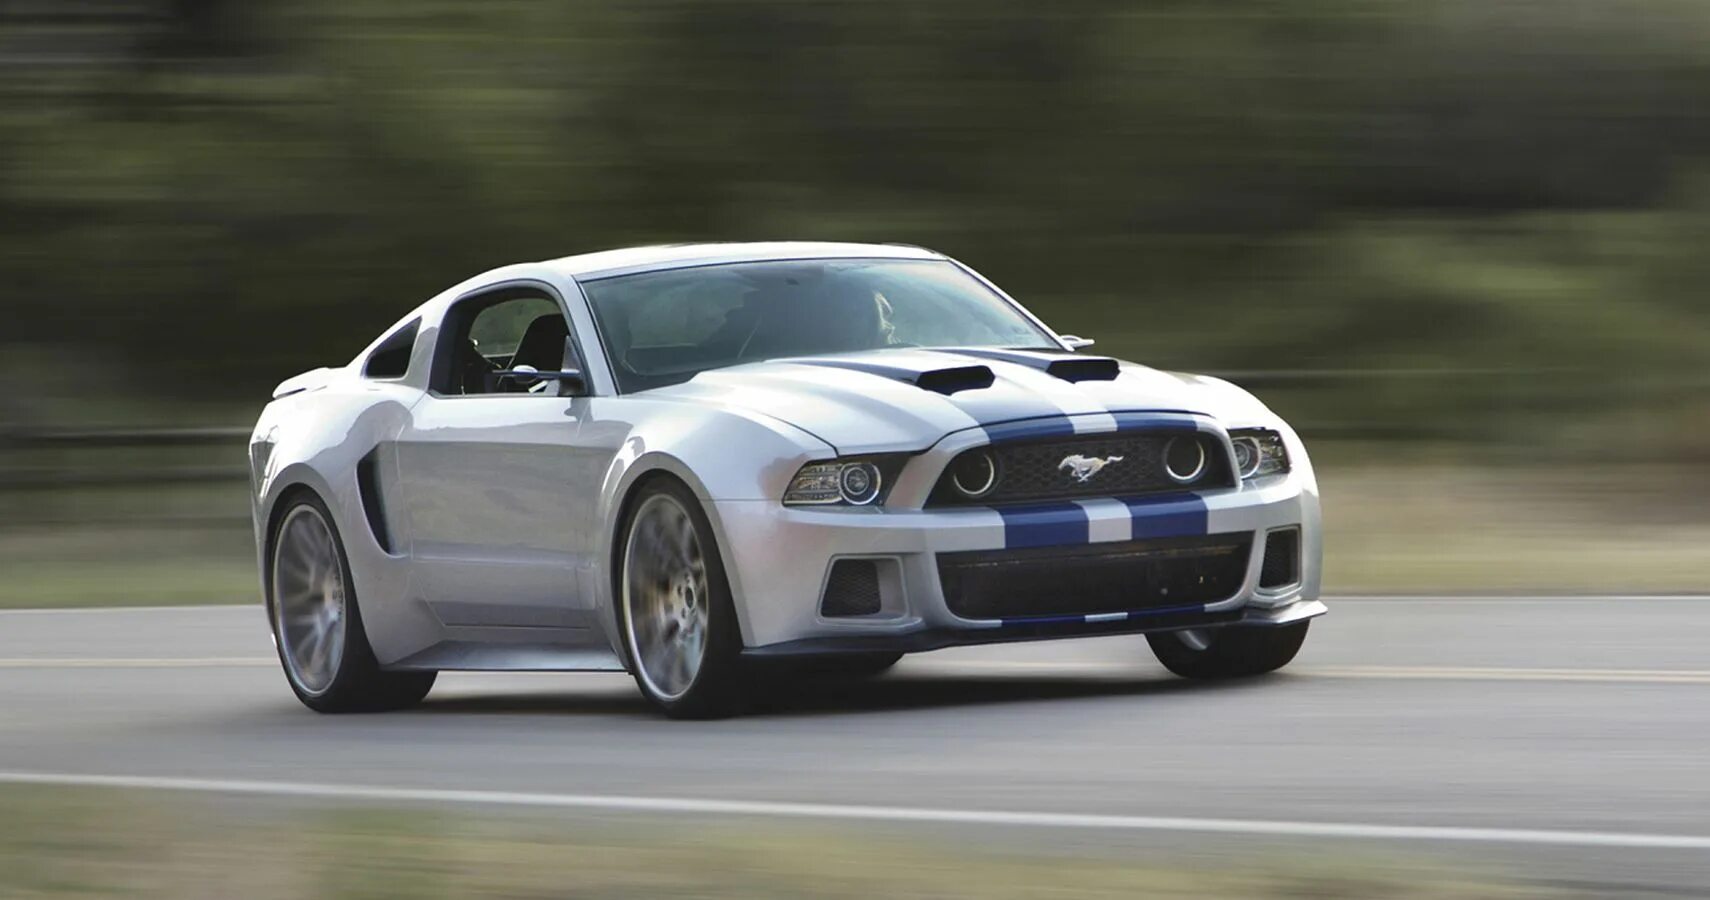 Need for speed мустанг. Ford Mustang Shelby gt500 2022. Ford Shelby gt500 жажда скорости. Need for Speed Ford Mustang Shelby gt500. Ford Mustang need for Speed жажда скорости.